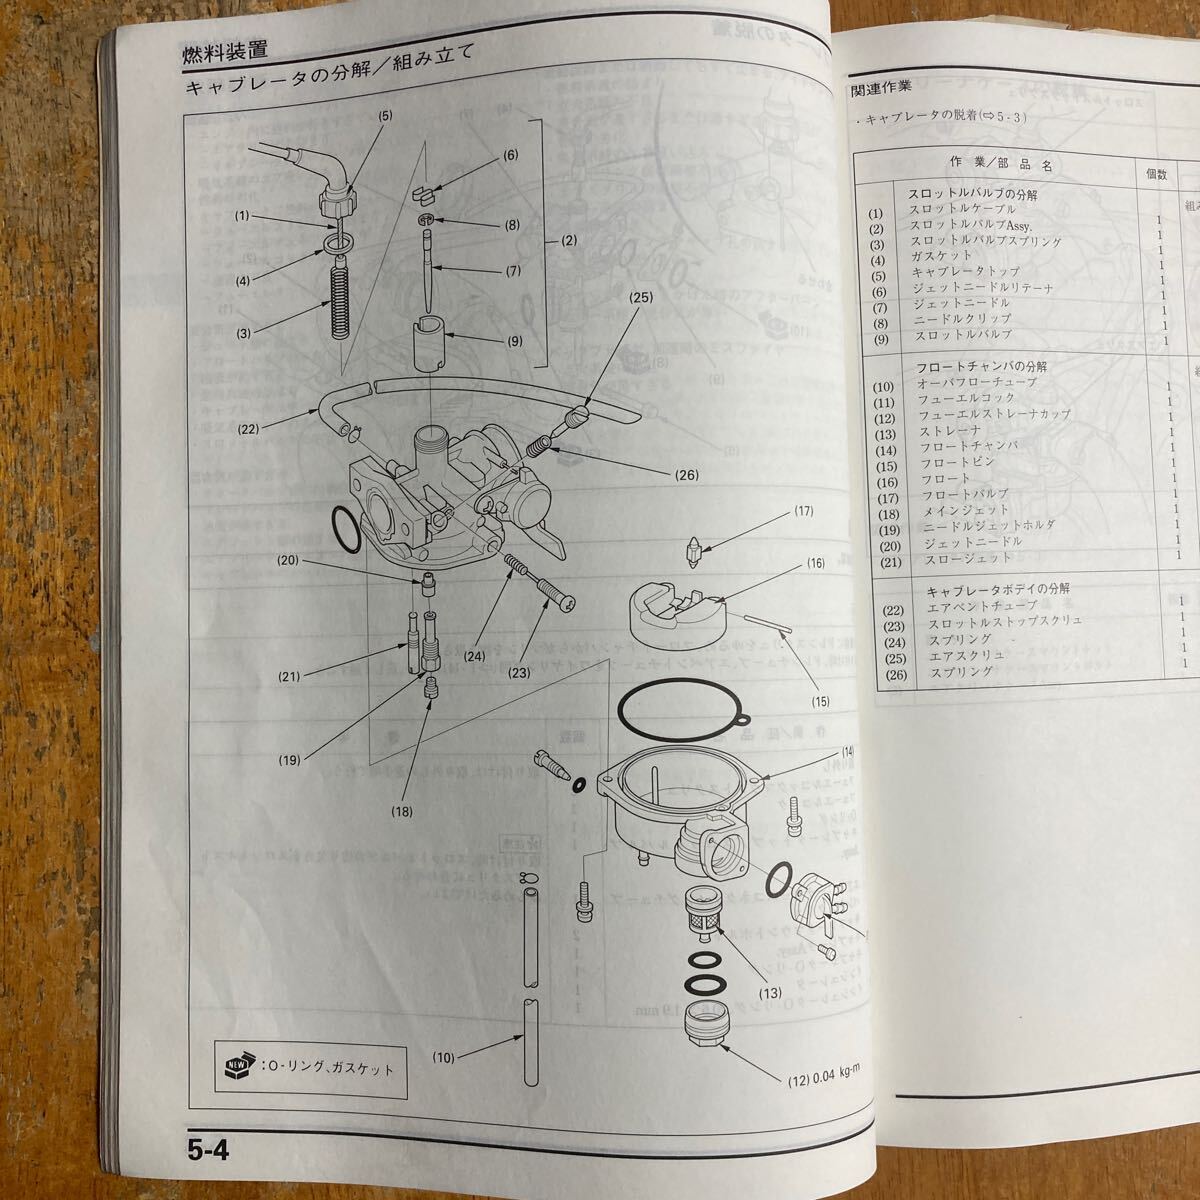  Dux service manual AB26 DAX 50 Heisei era. Dux used becomes.. use . problem no think.